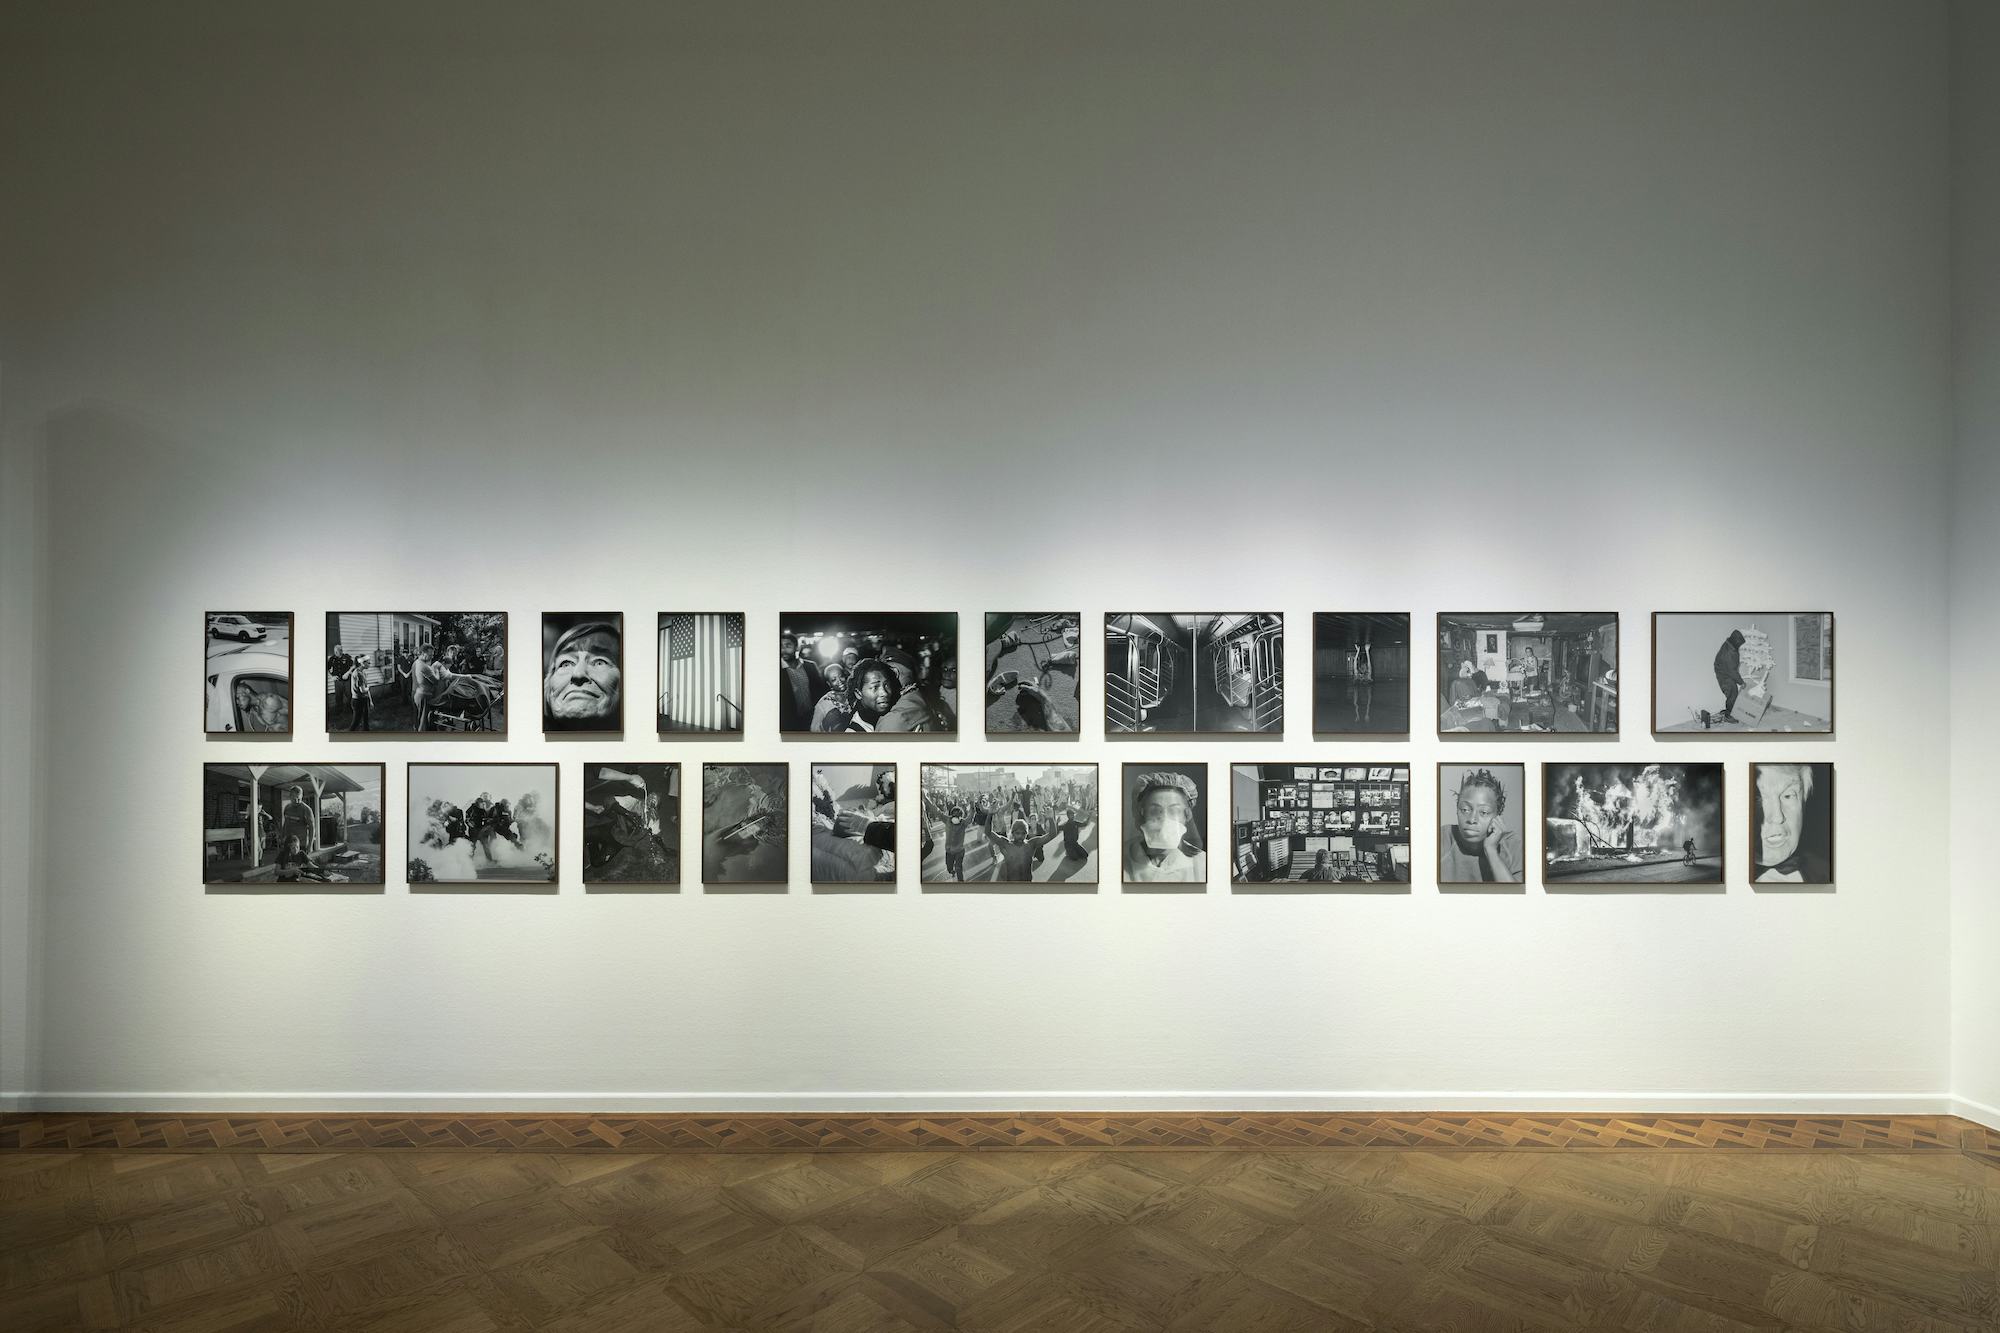 Installation shot of a series of black and white photographs by Philip Montgomery, presented on a white wall at Foam, Amsterdam